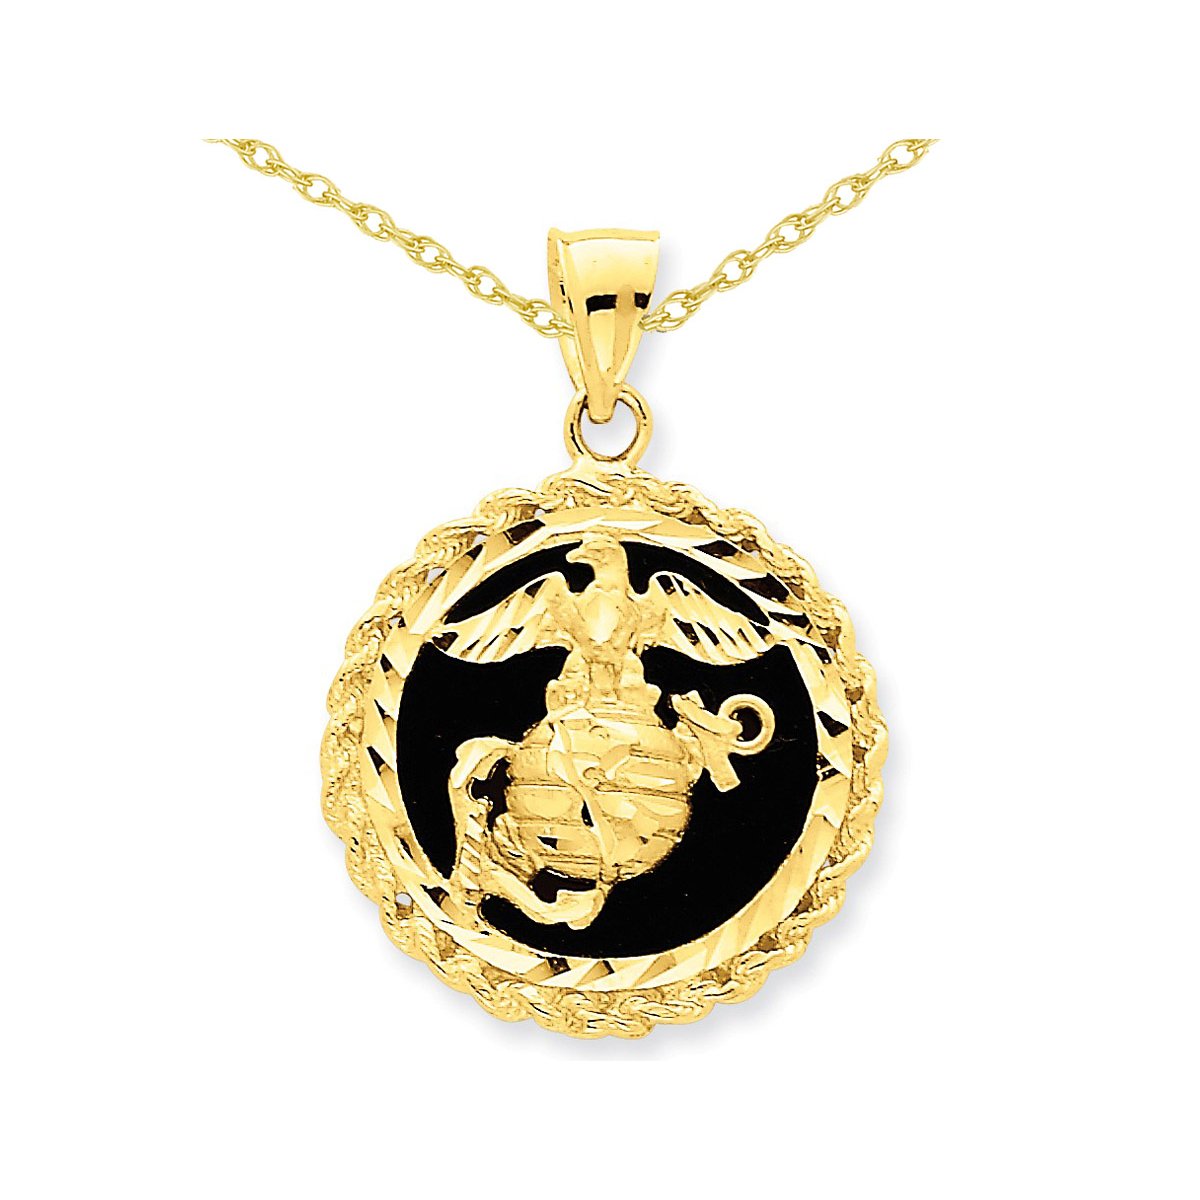 Gem And Harmony U.S. Marine Corp Charm Pendant Necklace in 14K Yellow Gold with Black Onyx with Chain